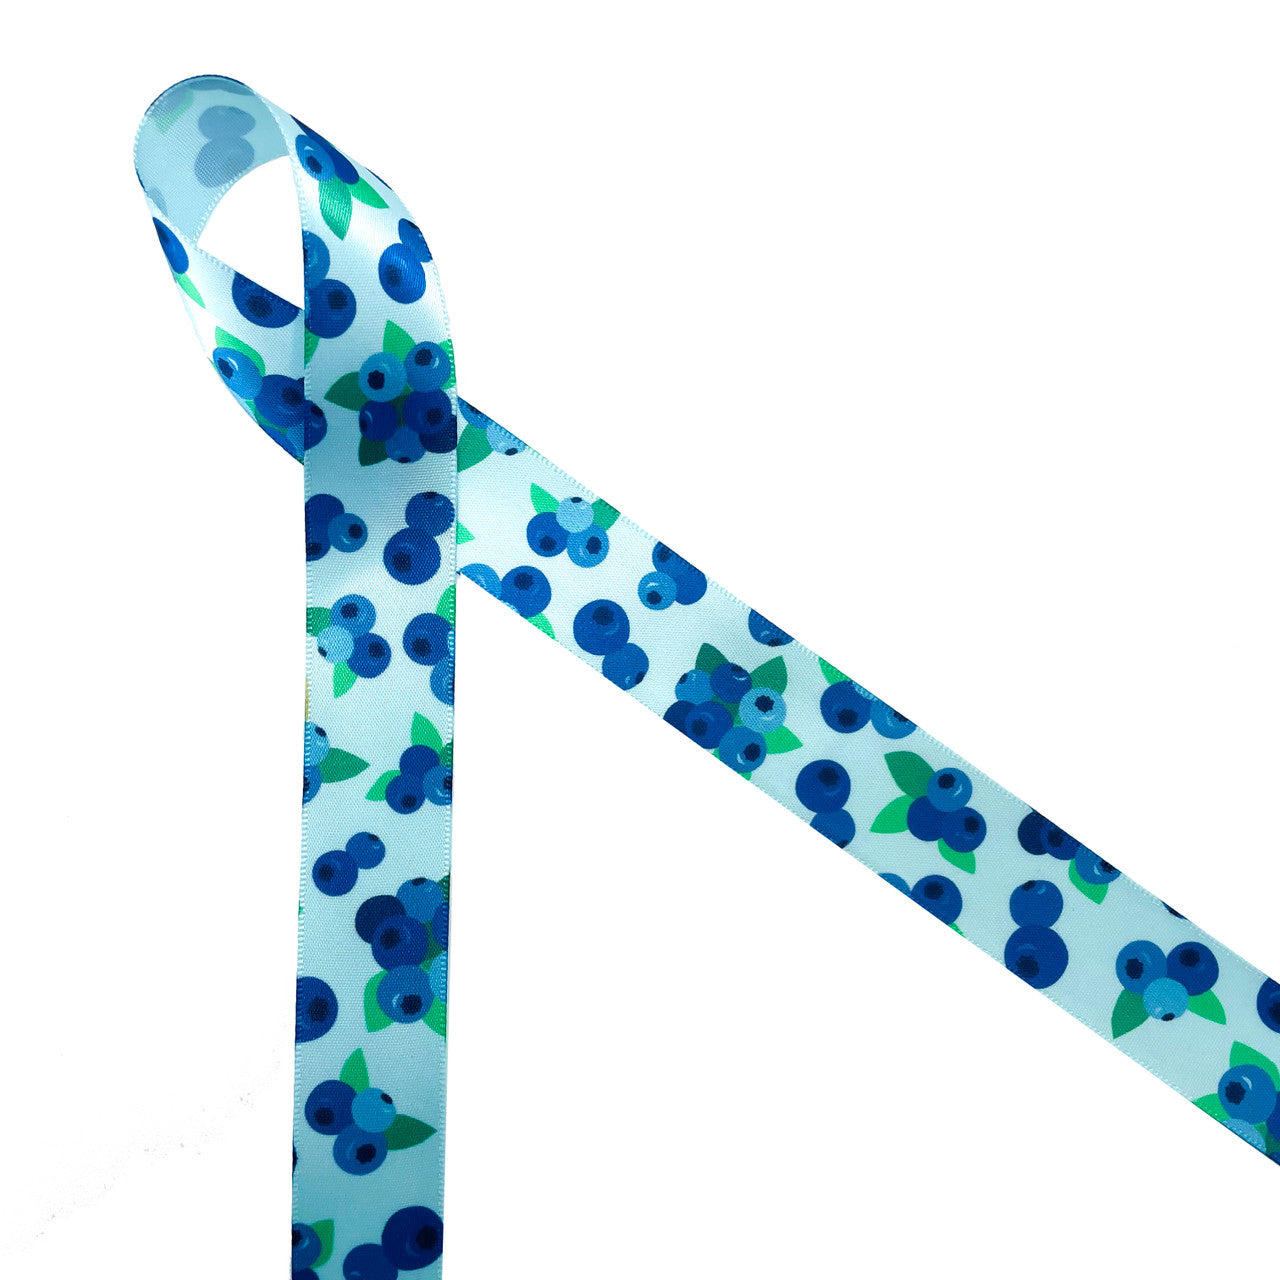 Blueberries in clusters printed on 7/8" light blue single face satin ribbon is  a must have for Summer gifts, packaging and crafts. This is a great ribbon  for gift wrap, quilting, jams, jellies, party decor and wreaths! All our ribbon is designed and printed in the USA